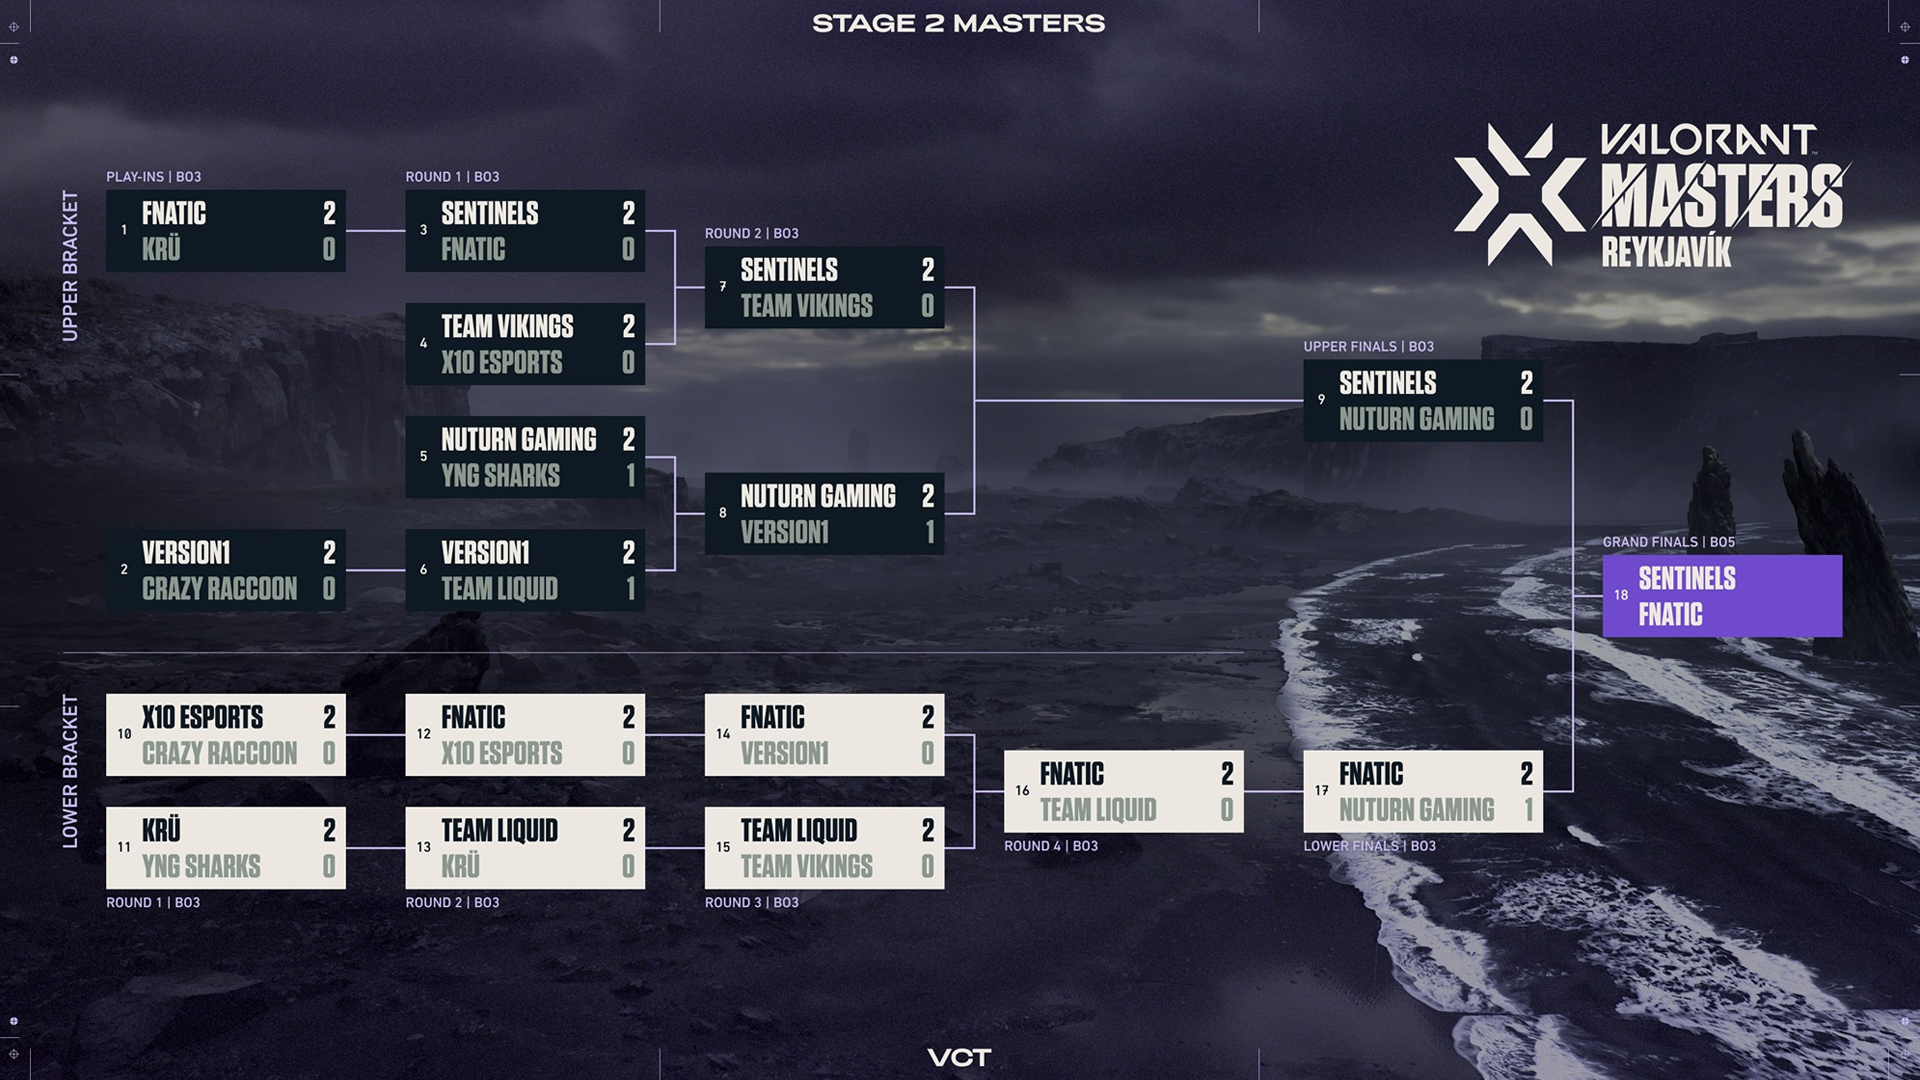 VCT Stage 2 Masters Results, schedule, format, teams, and prize pool